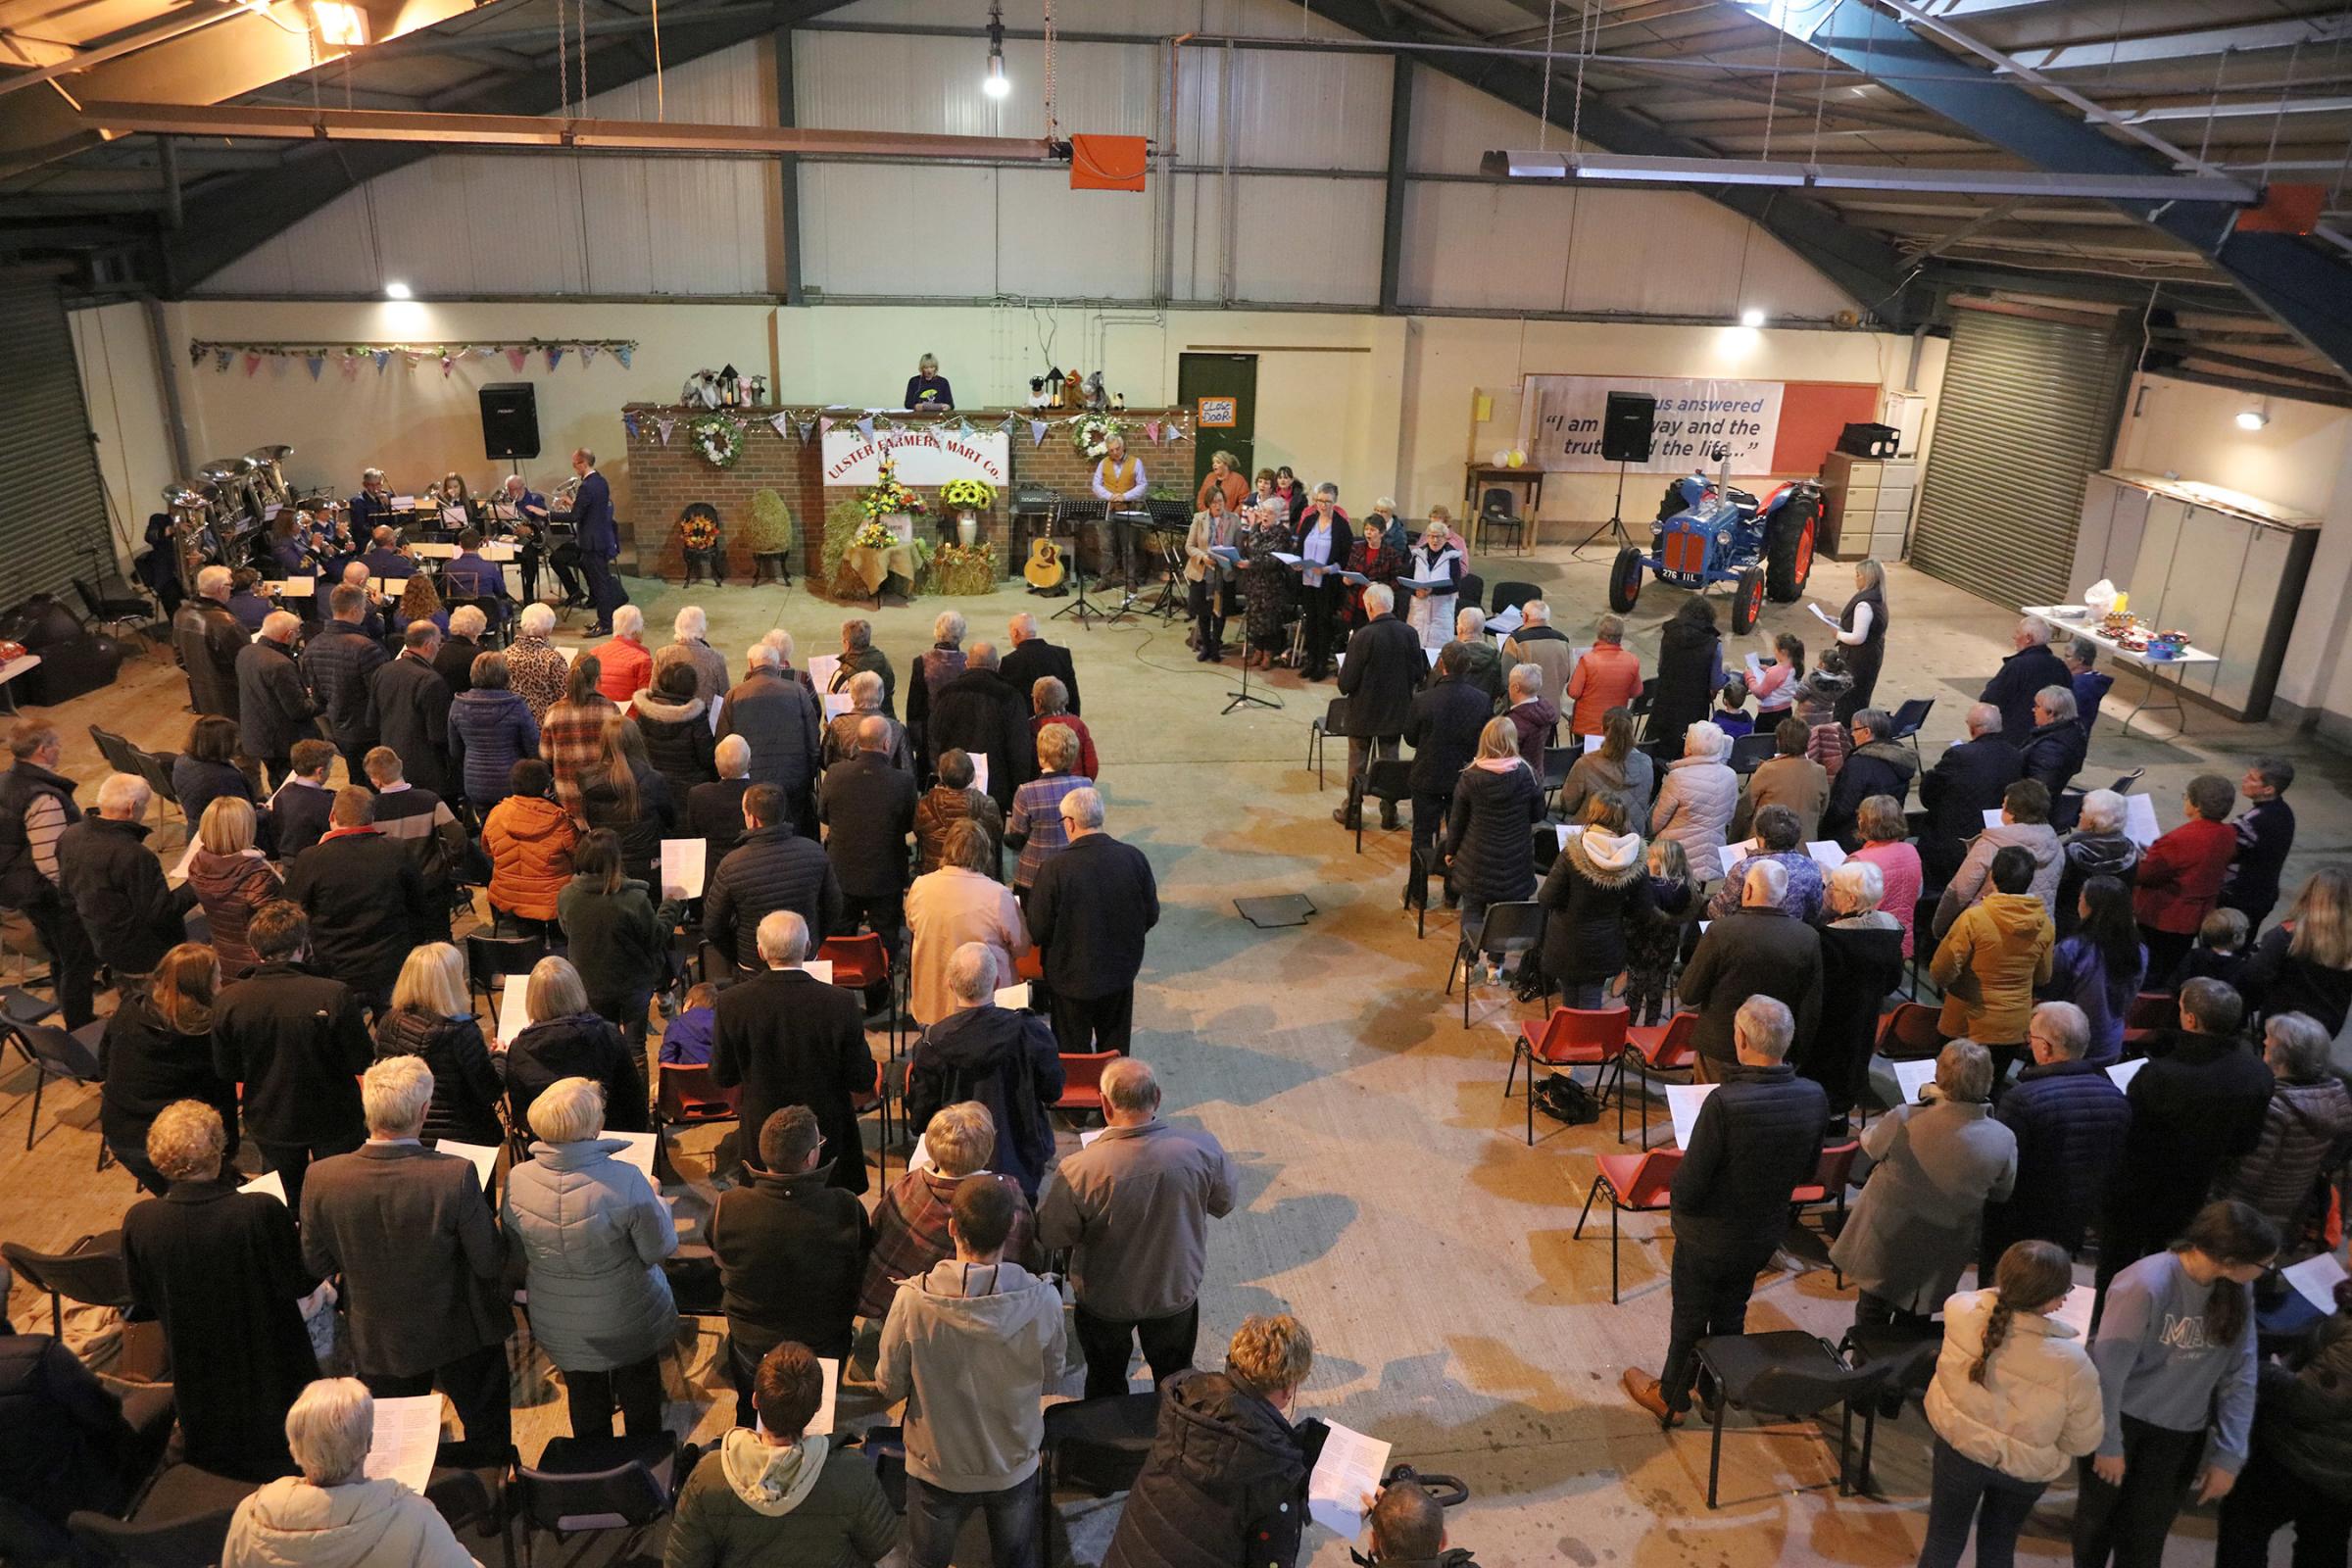 There was a large turnout for the All Creatures Great And Small service at the Ulster Farmers Mart in Enniskillen.